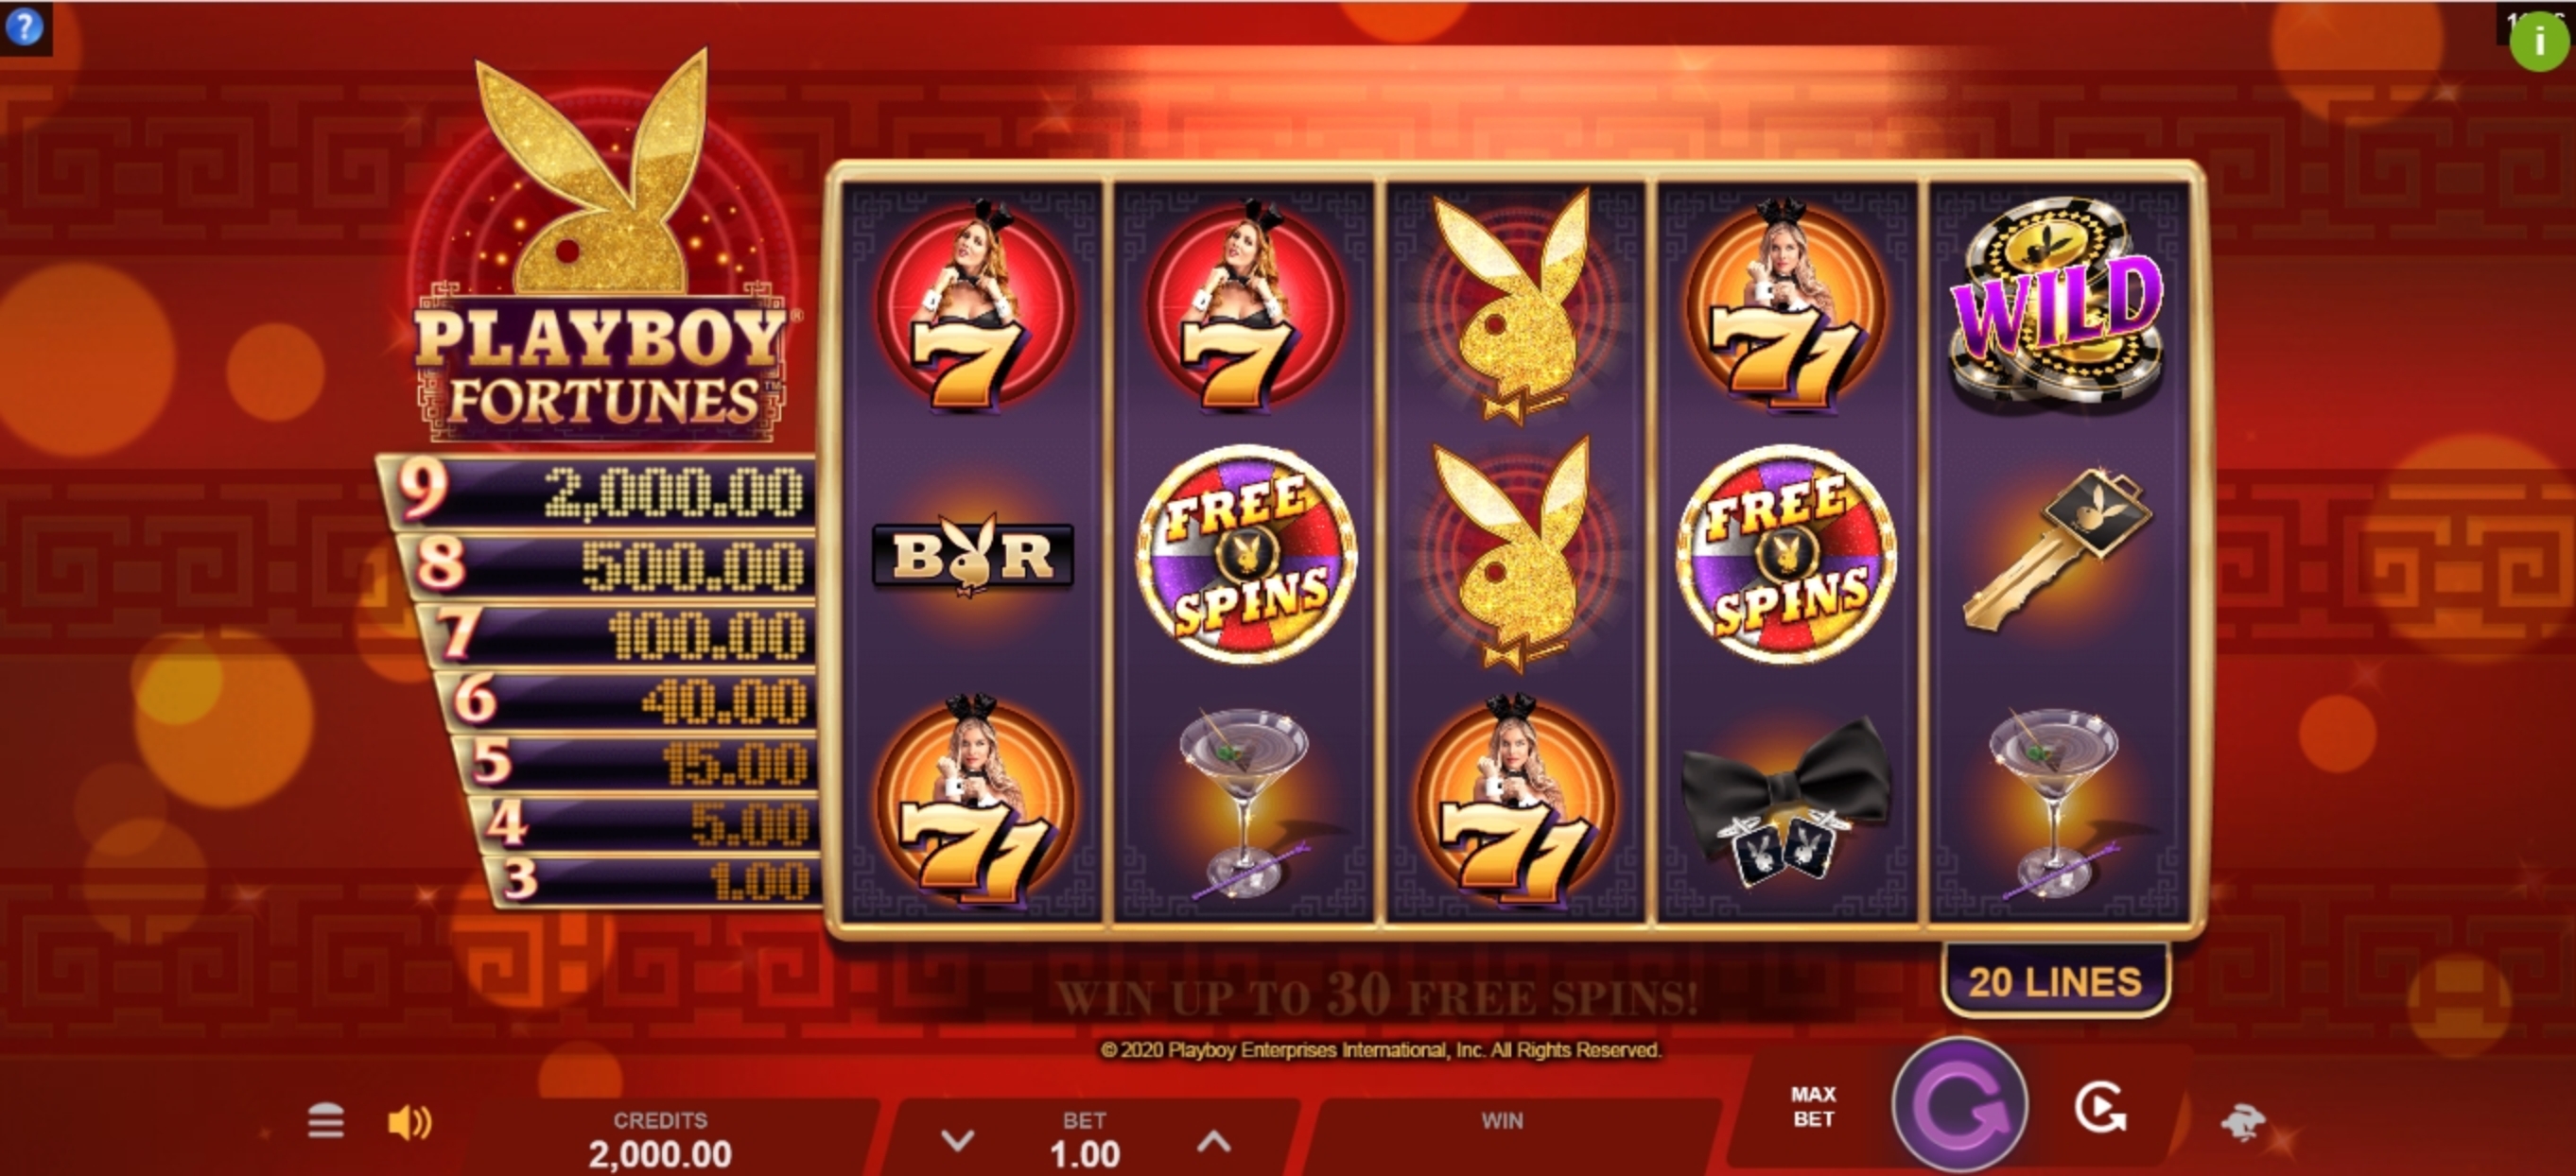 Reels in Playboy Fortunes Slot Game by Gameburger Studios